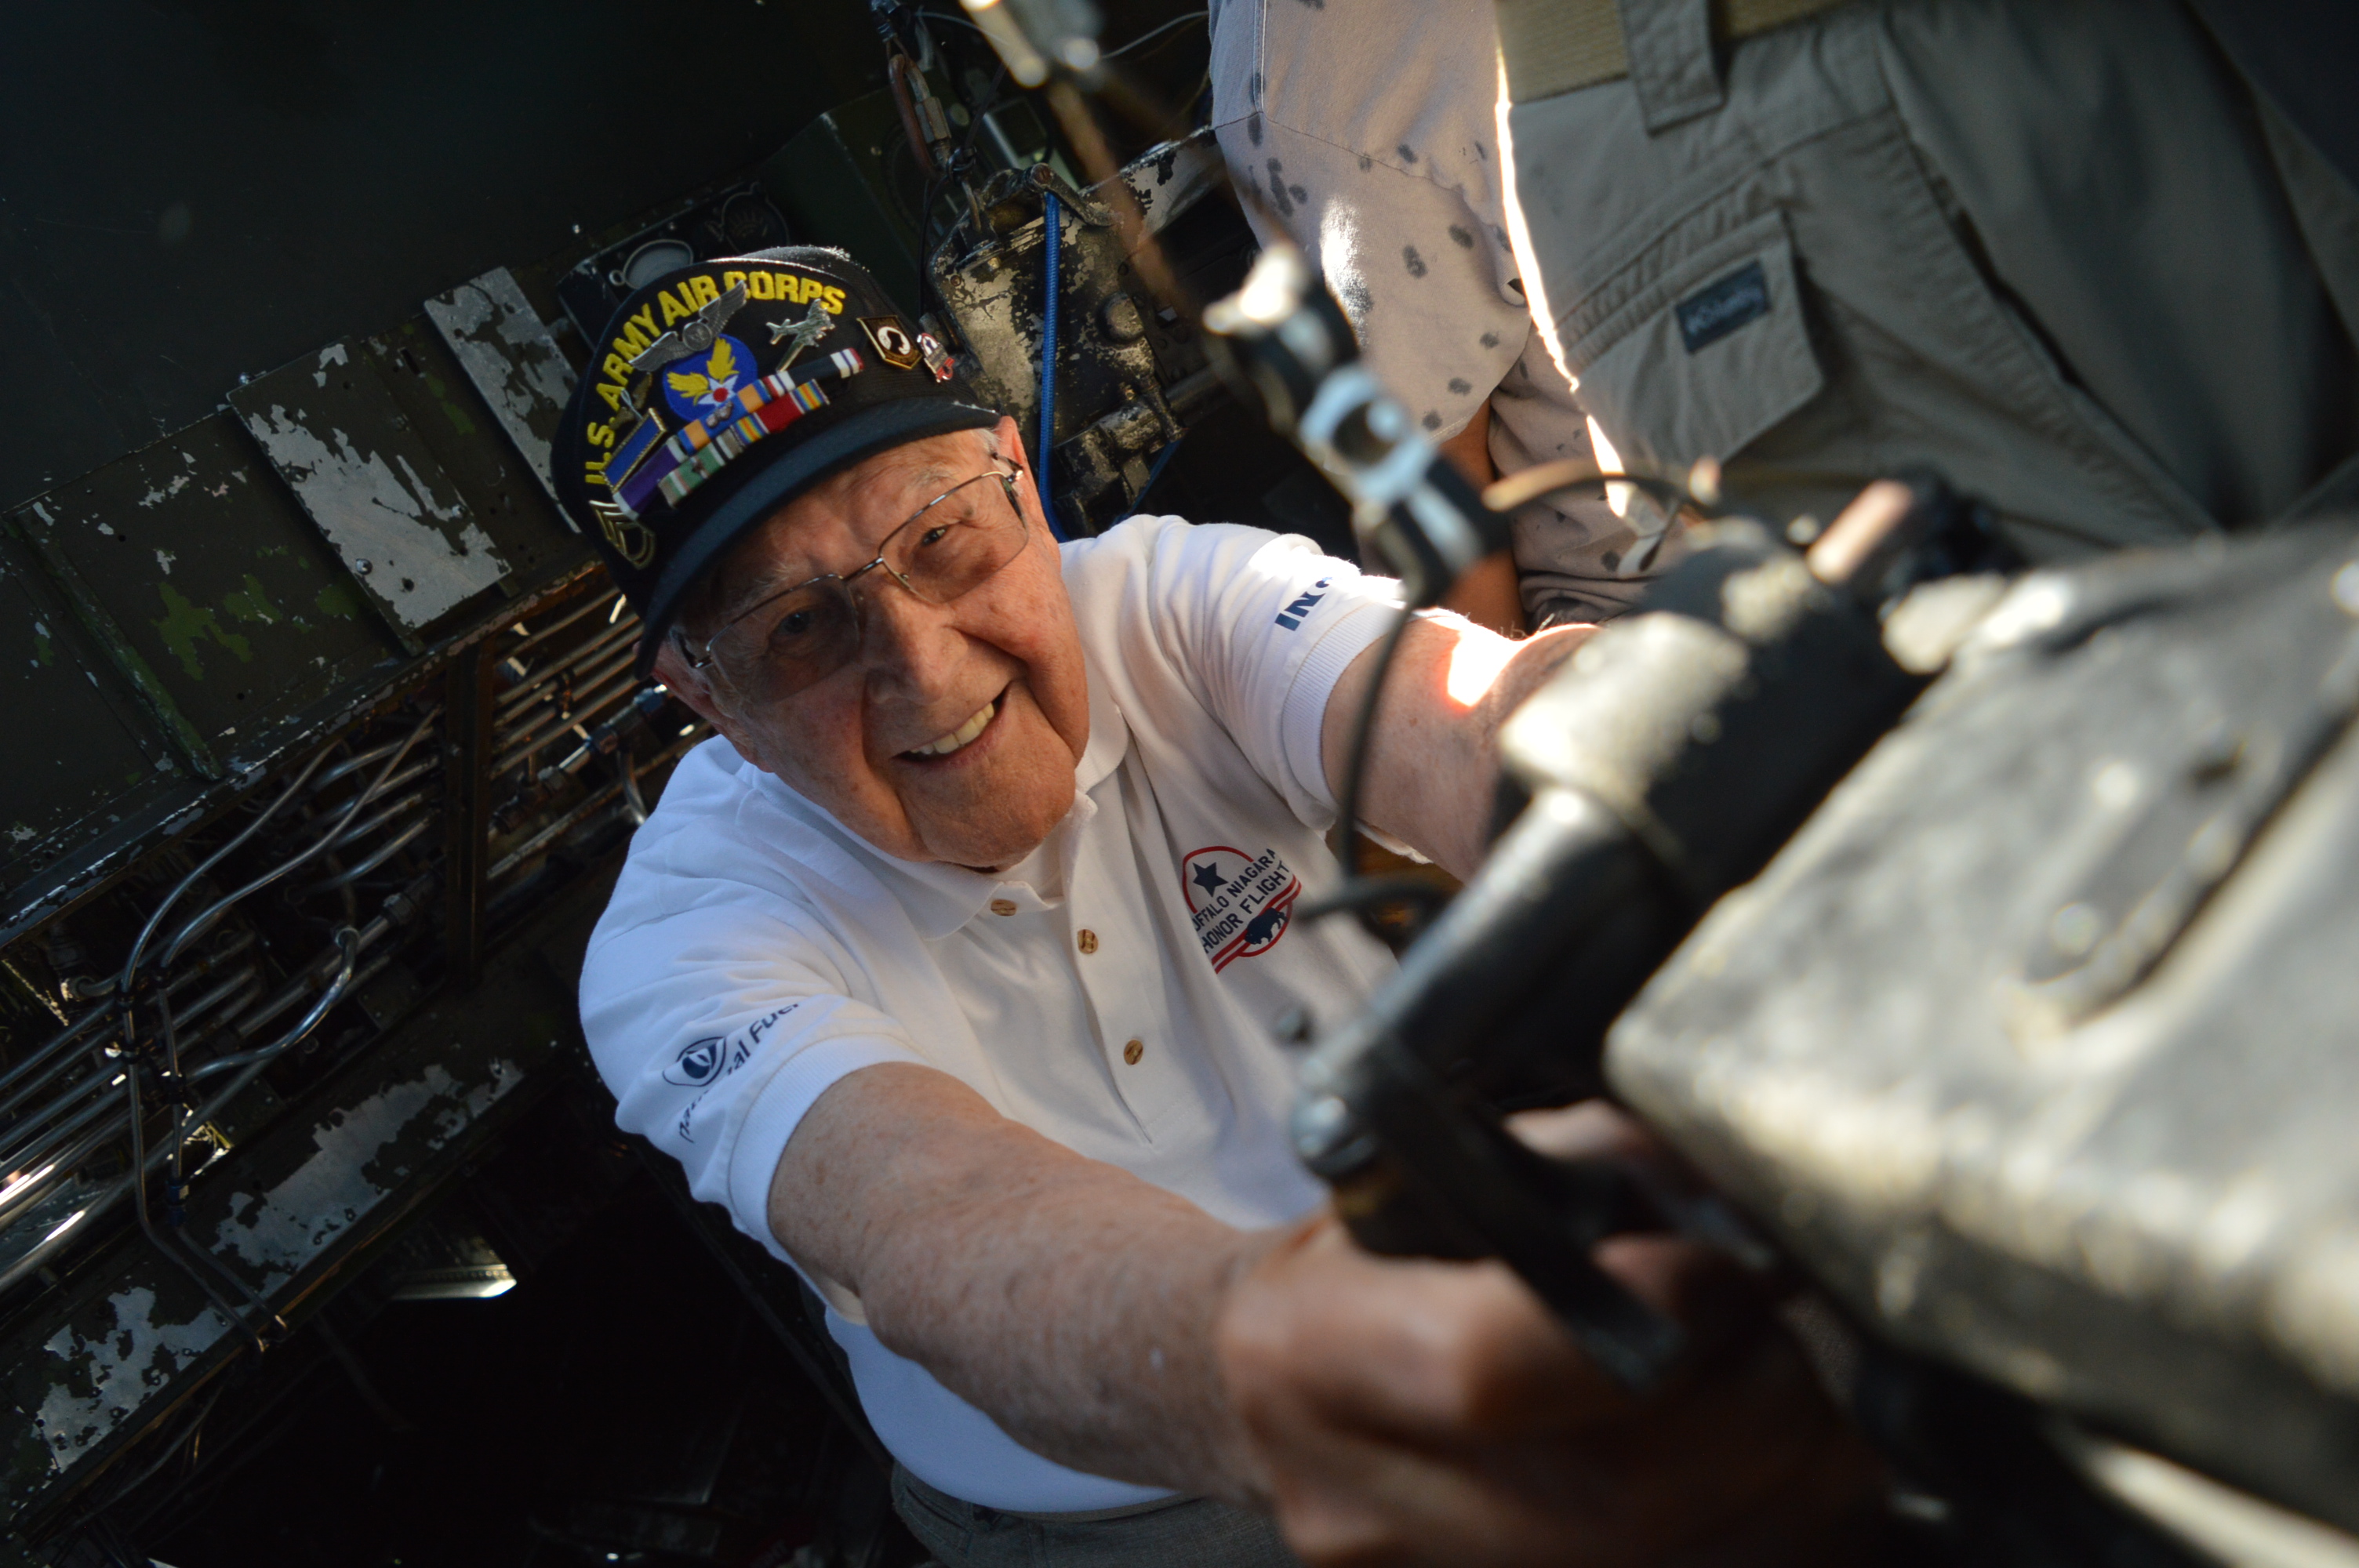 WWII veteran "Casey" Bukowski takes careful aim during his memorable flight aboard "The Movie" Mephis Belle. Casey took a ride during the 2019 Geneso Airshow at the Natinal Warplane Museum.(Anthony C. Hayes)